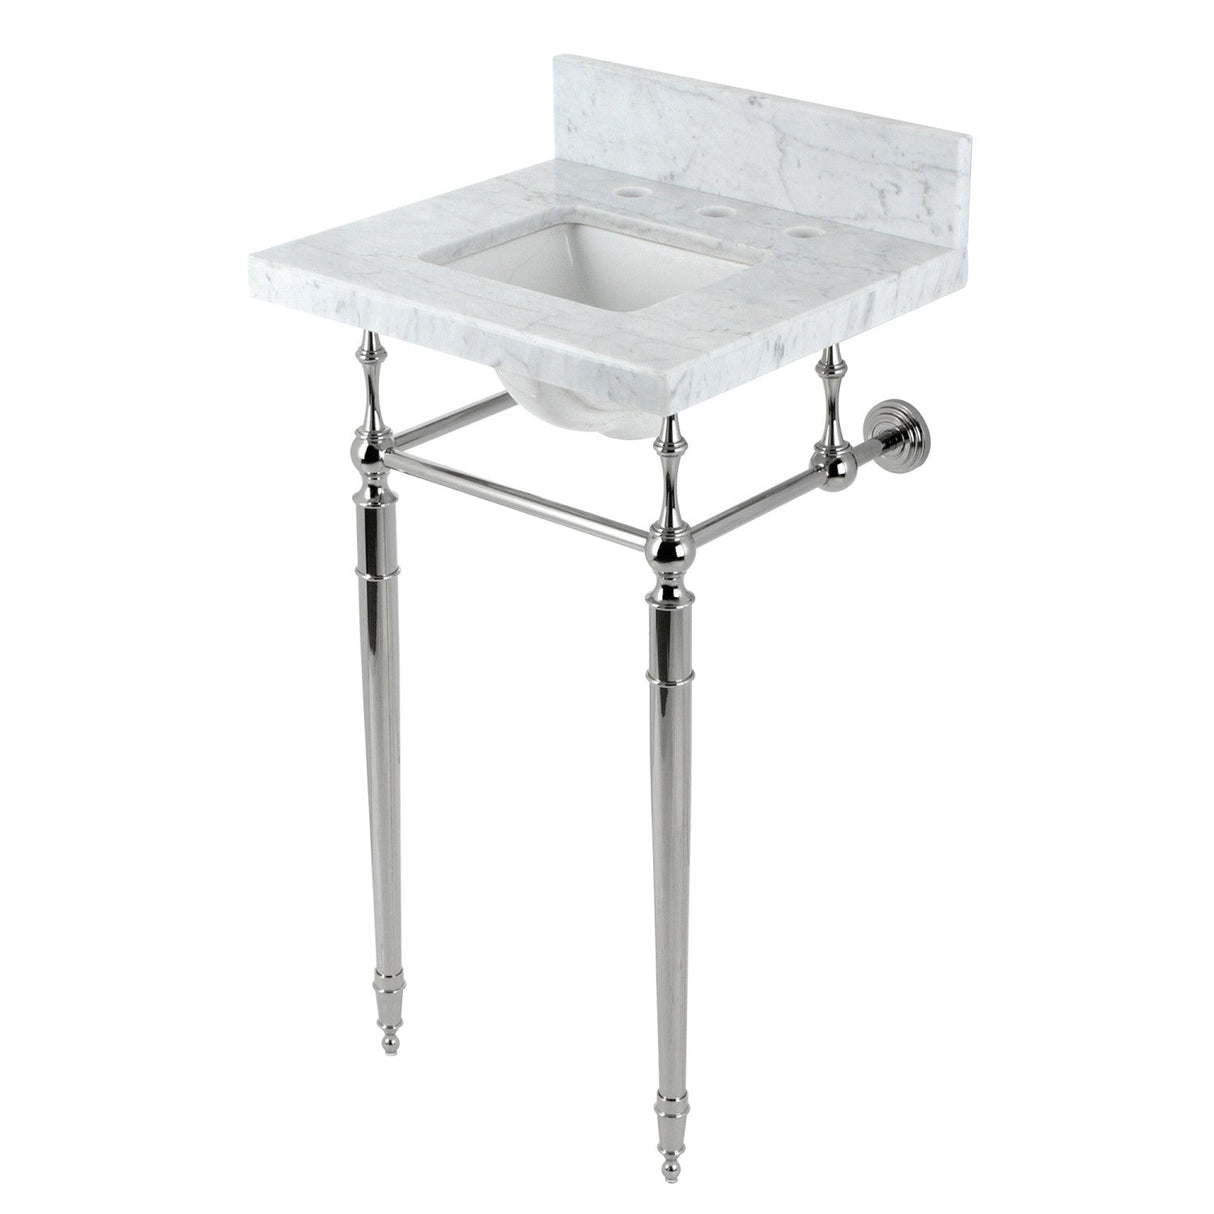 Fauceture KVPB1917M8SQ6 19-Inch Carrara Marble Console Sink with Brass Legs (8" Faucet Drillings), Marble White/Polished Nickel